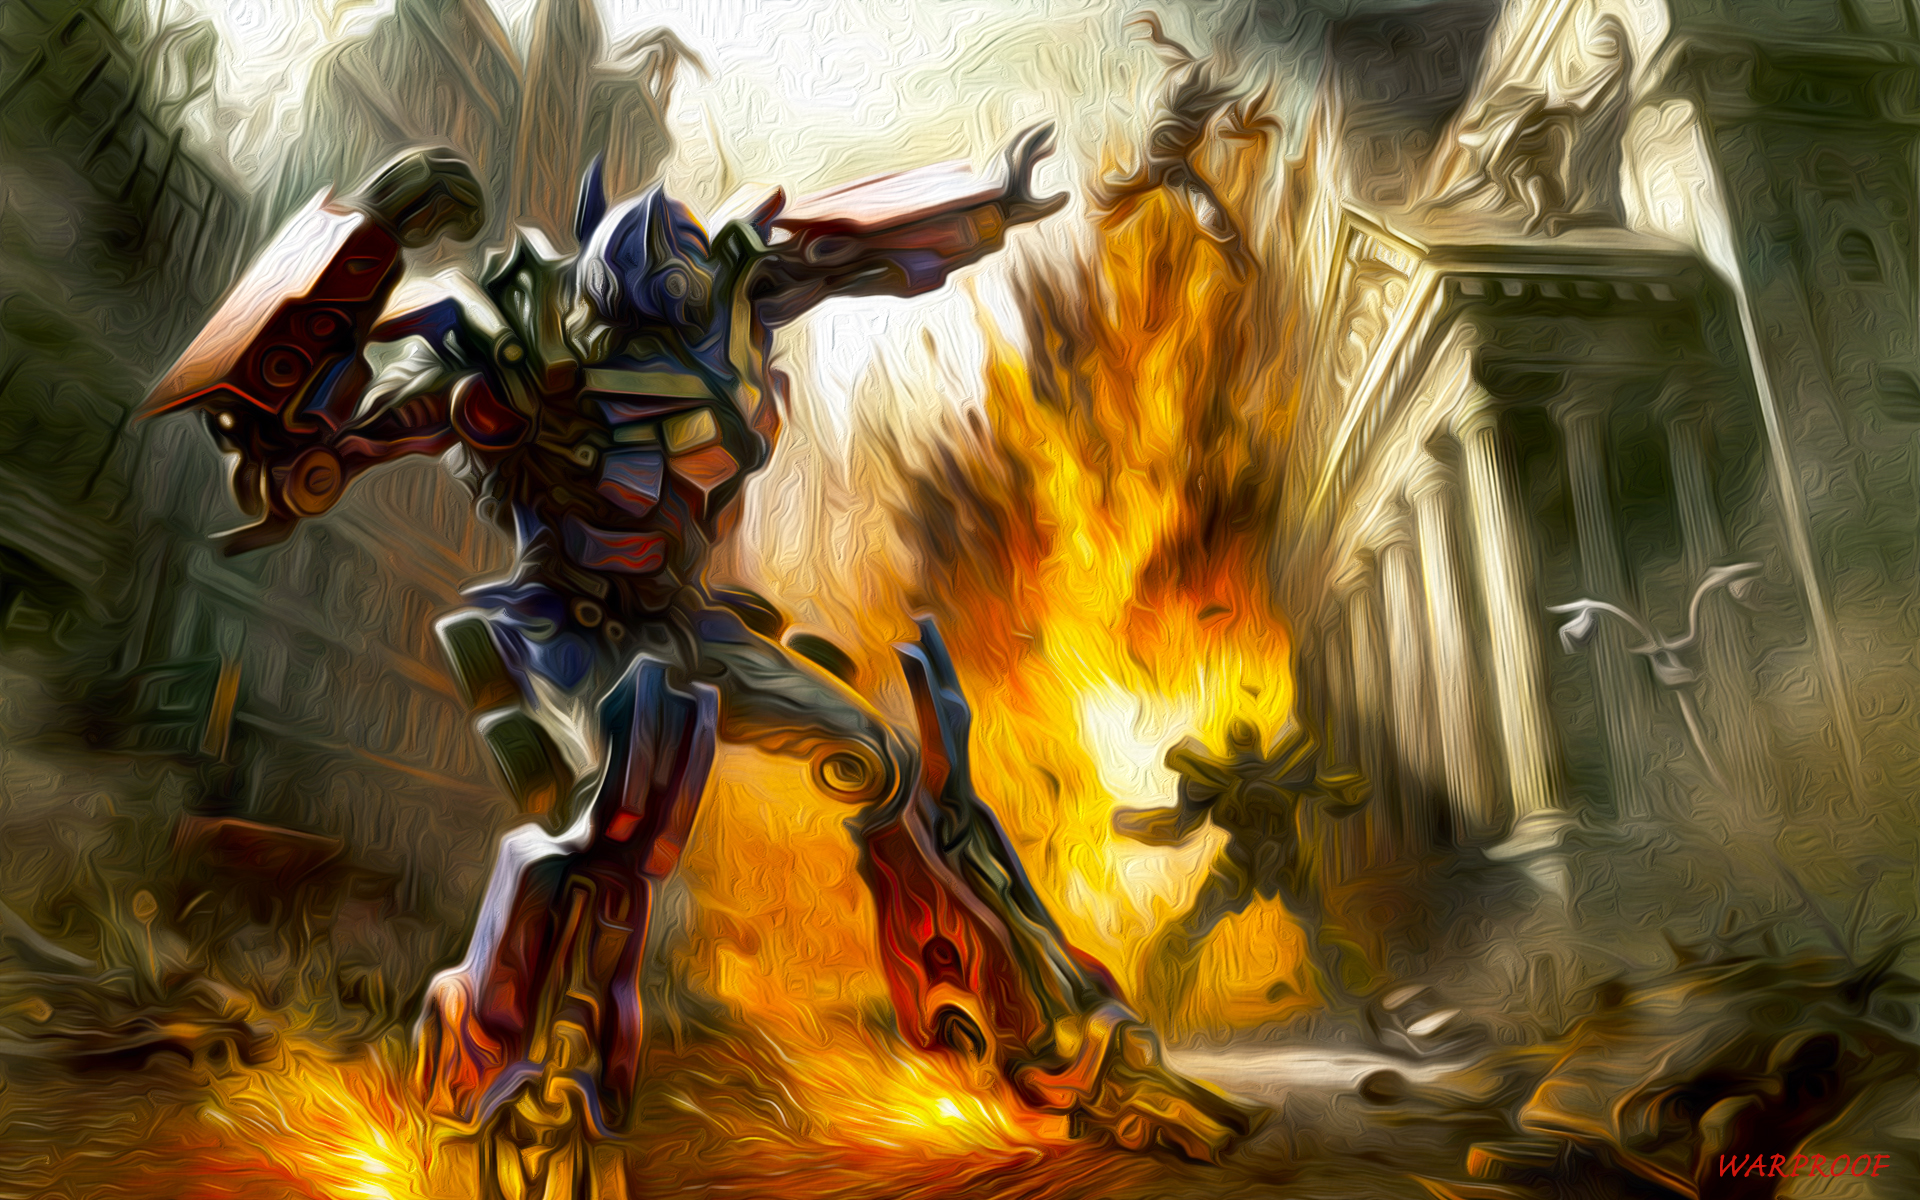 Movie Transformers: Dark of the Moon HD Wallpaper | Background Image